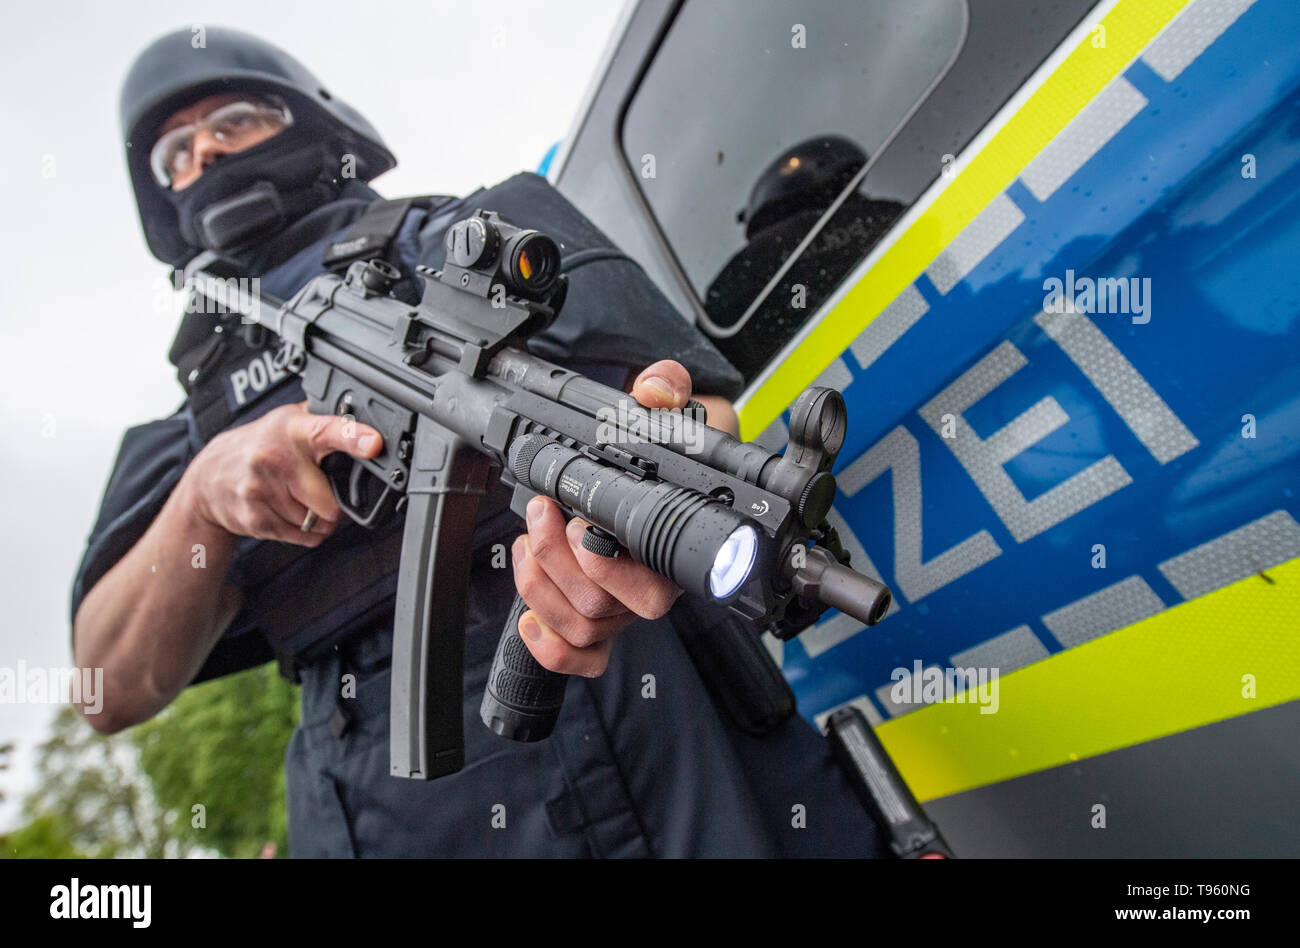 09 May 2019 Hessen Wiesbaden With The Mp5 Submachine Gun From